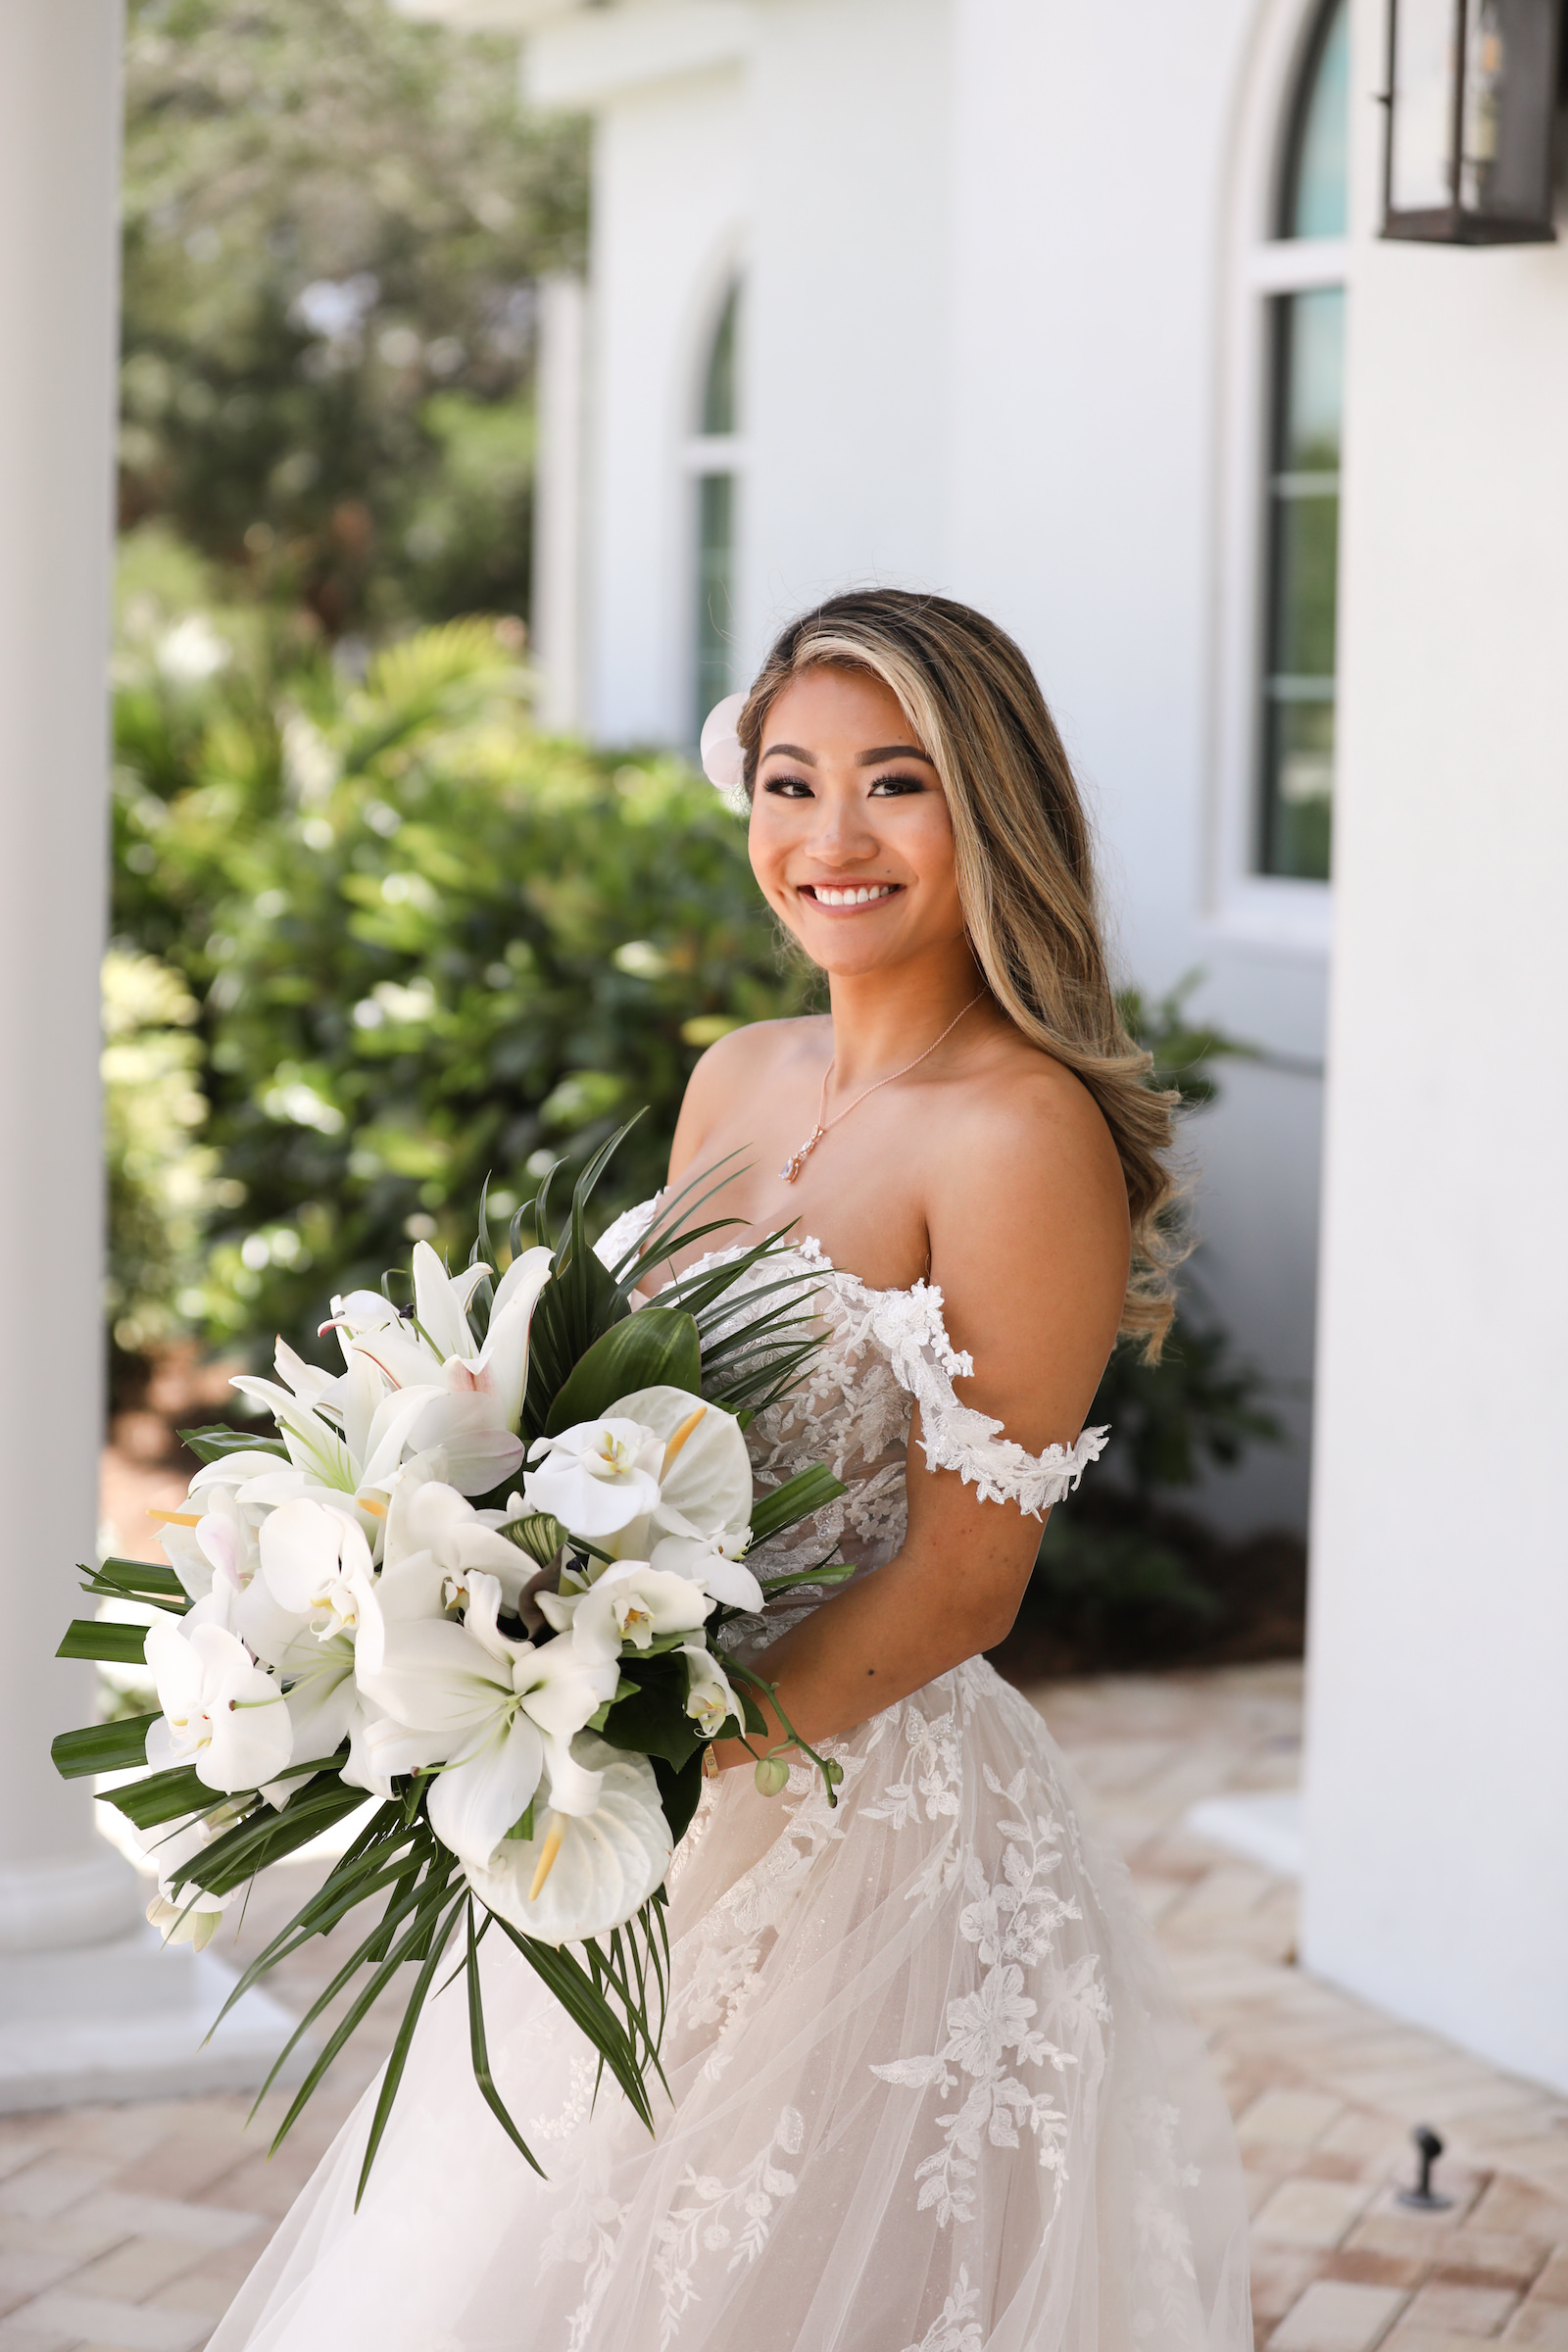 Bride in Classic Glam Hair and Makeup Holding White Calla Lily Bouquet | Tampa Hair and Makeup Artist Savannah Olivia Beauty Boutique